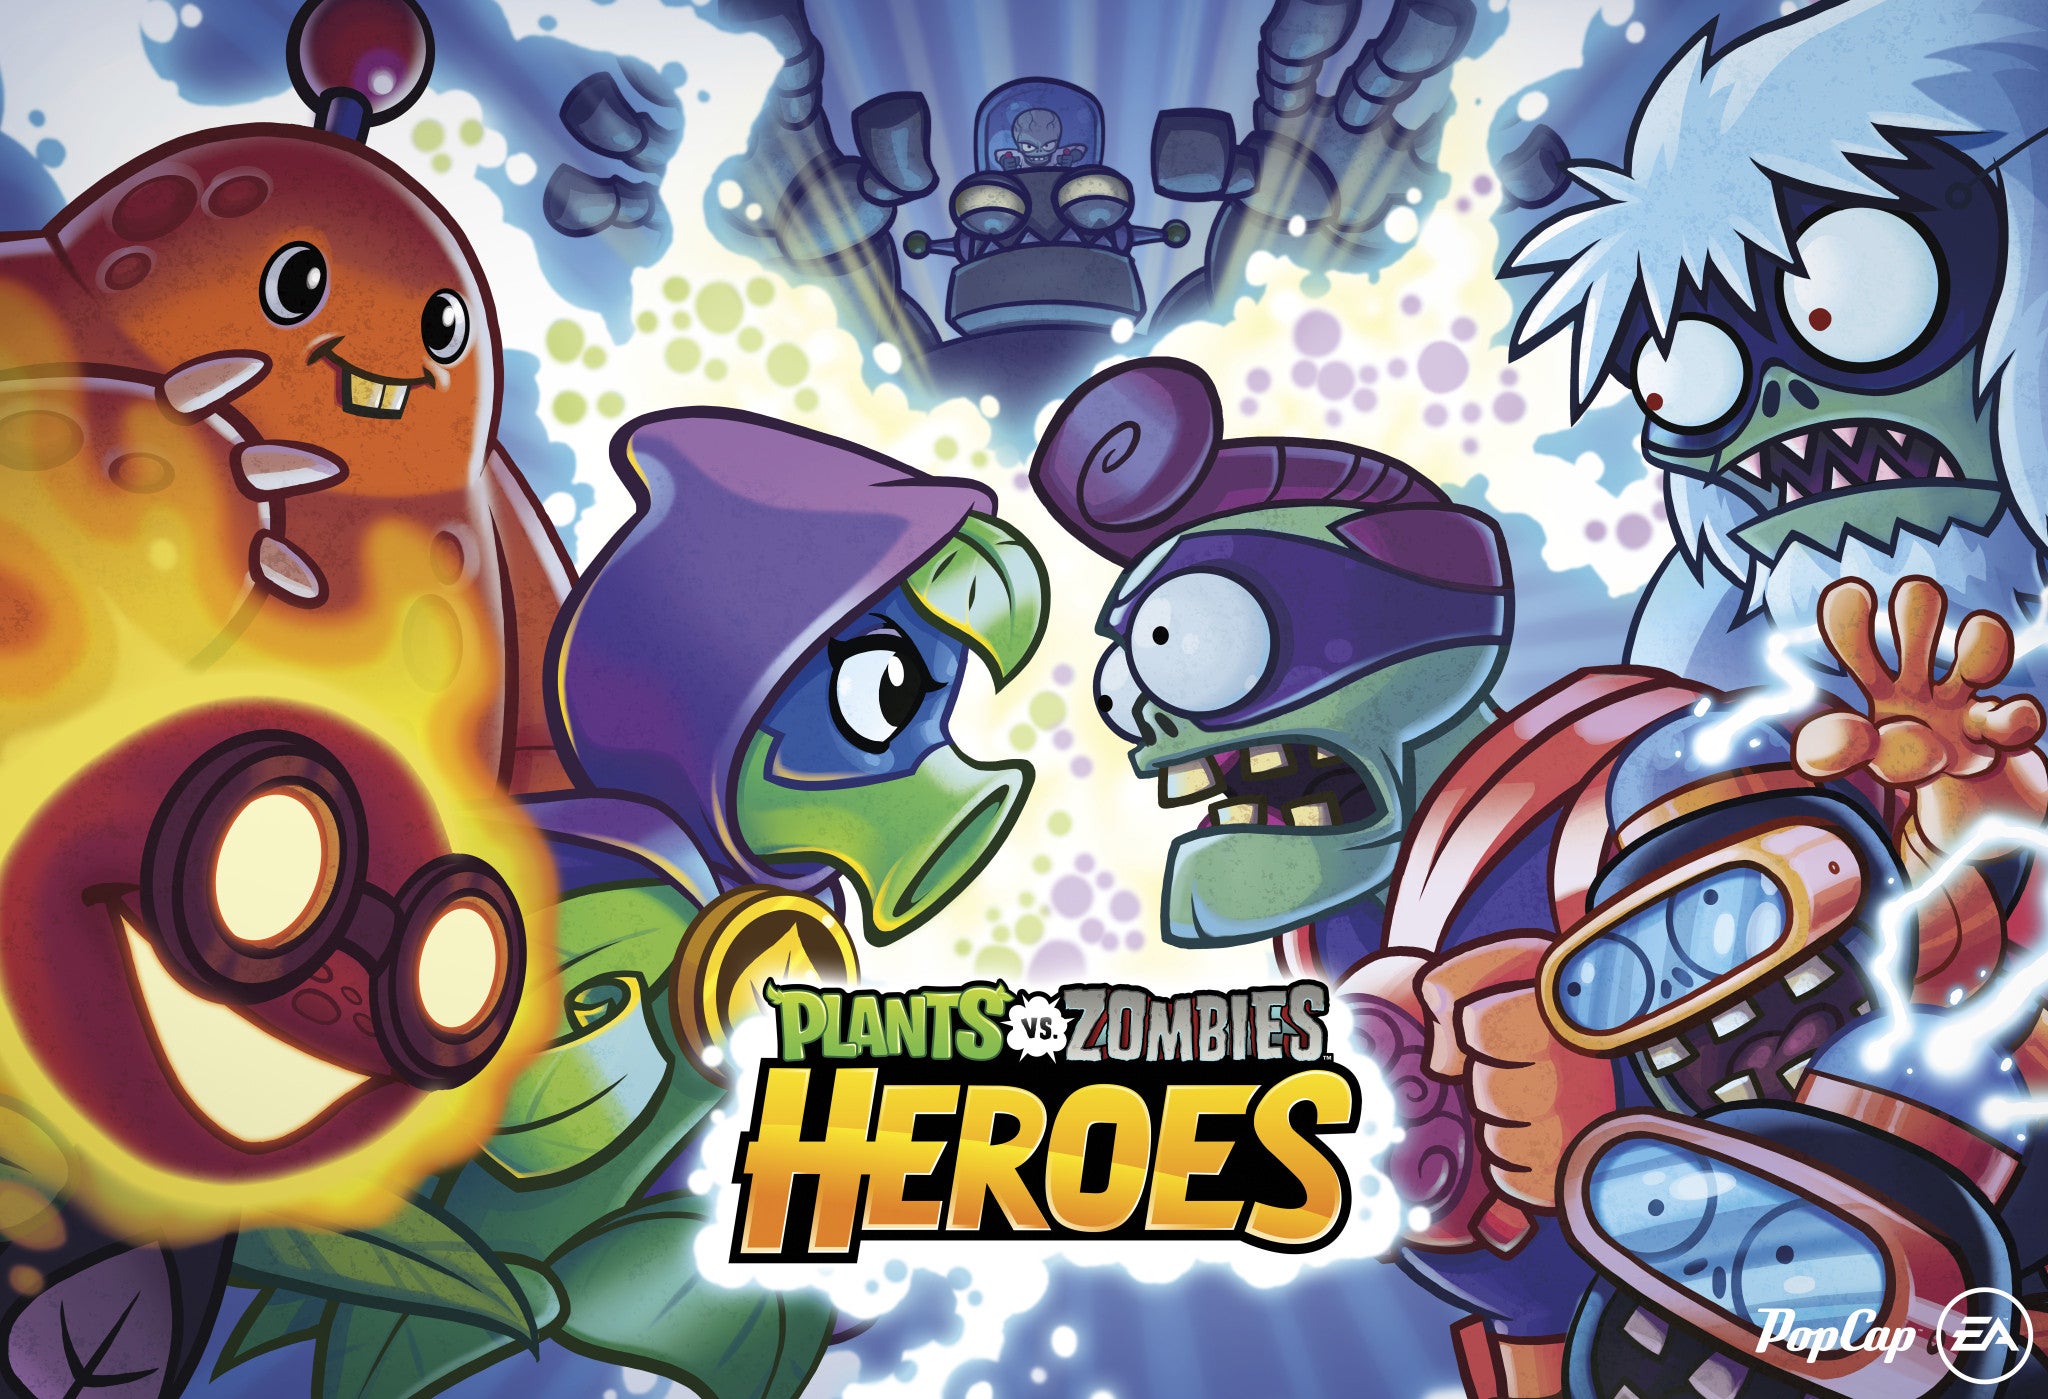 EA's Plants vs. Zombies Heroes collectible card game arrives on Android and iOS devices